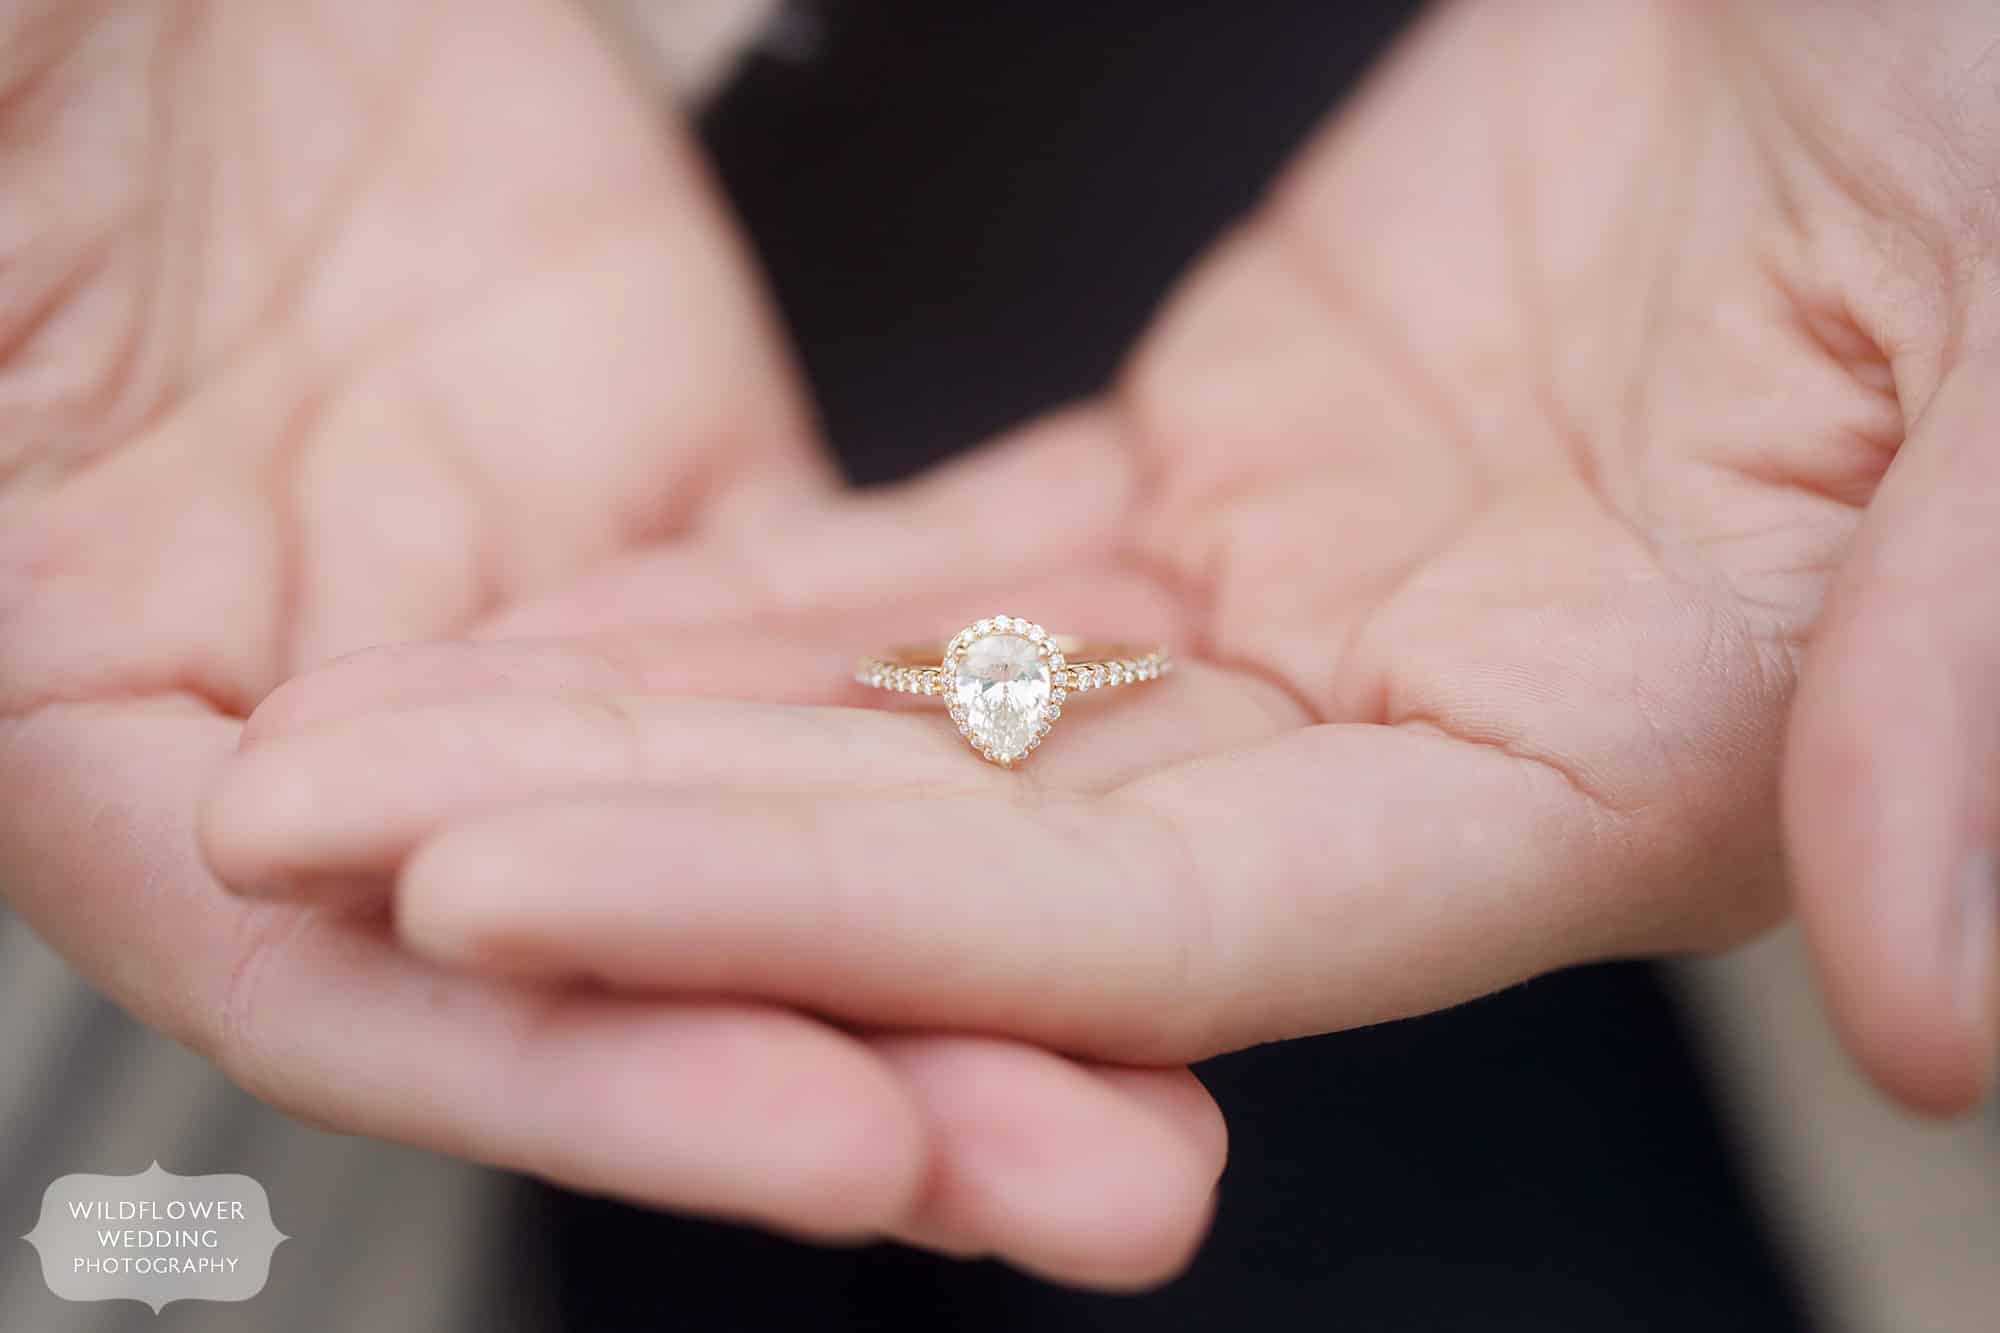 Candid wedding photos of this surprise proposal with a vintage pear shaped diamond engagement ring.